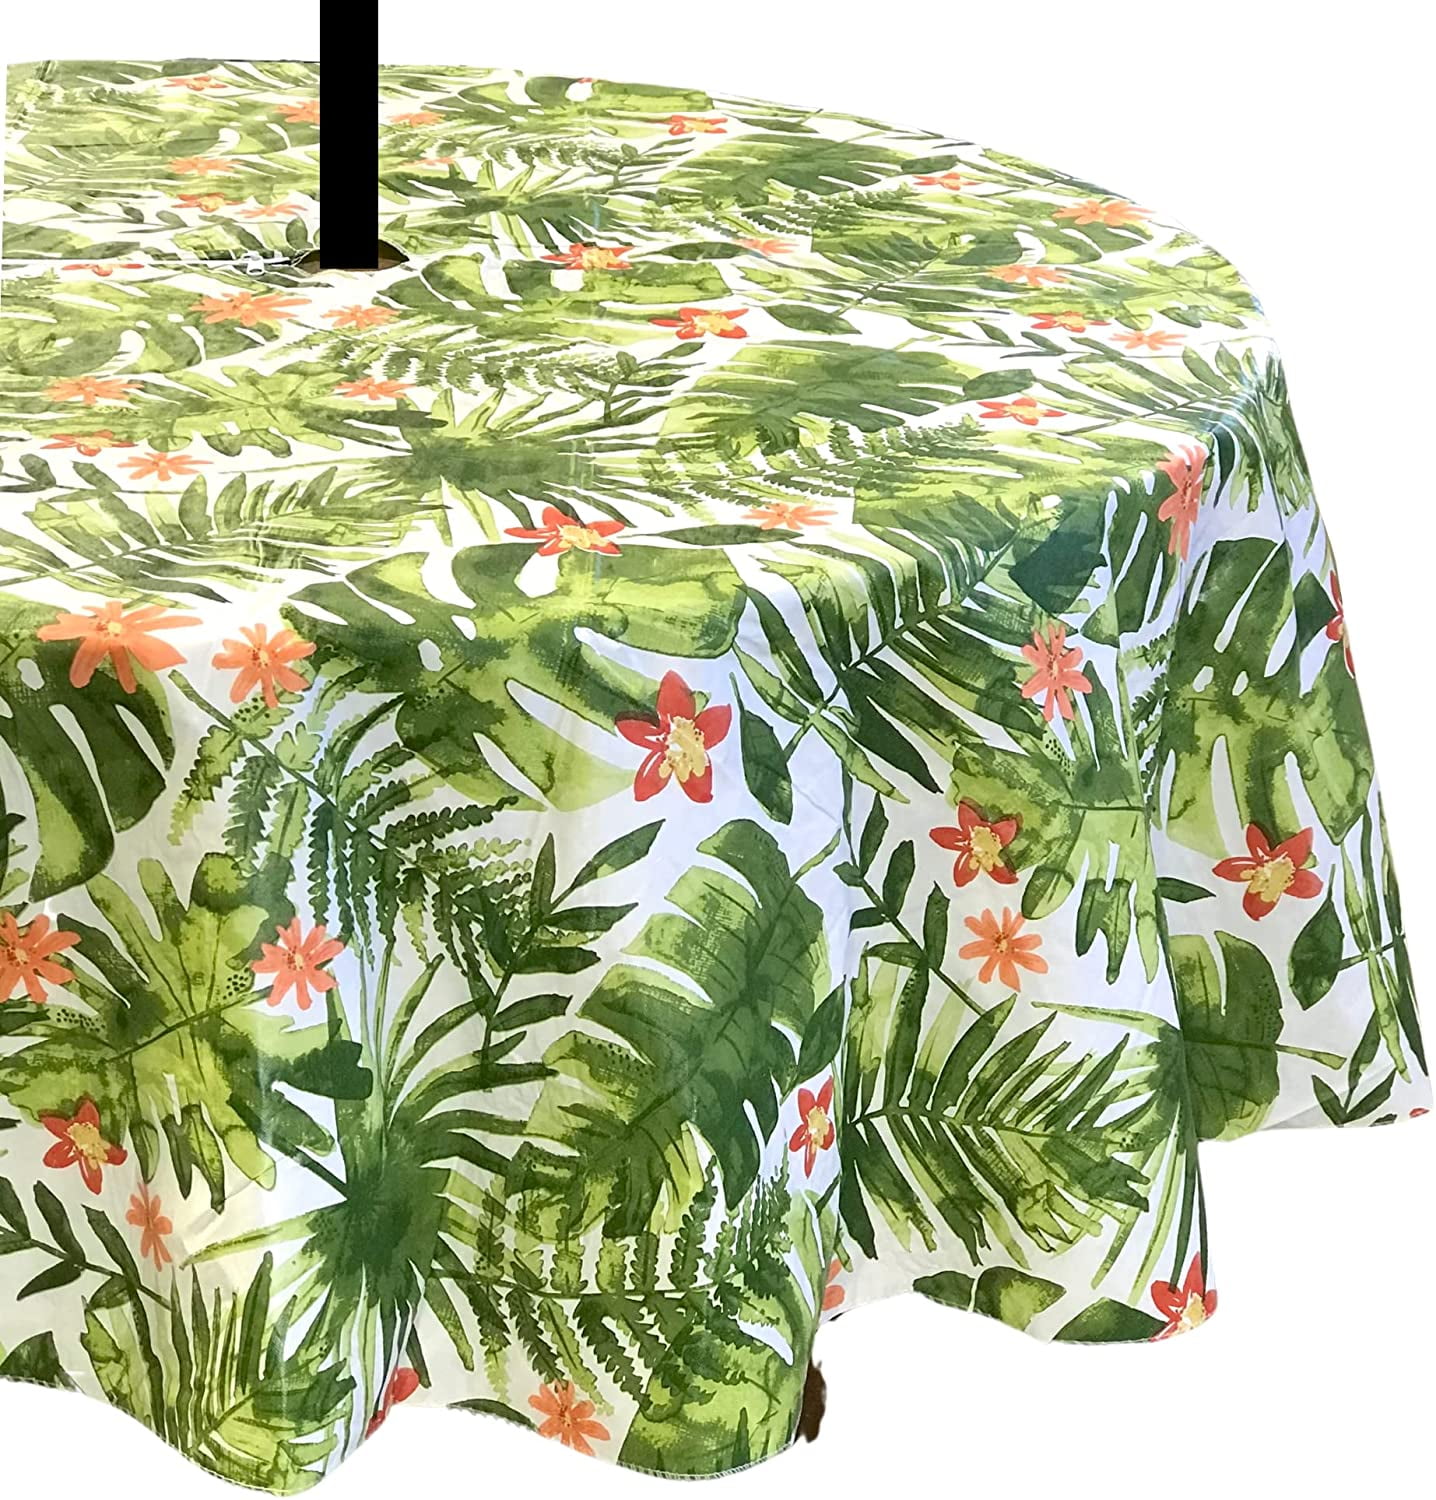 Vinyl Tablecloth Flannel Back Flowers BBQ Fish More 10 Styles Spring Summer NEW 